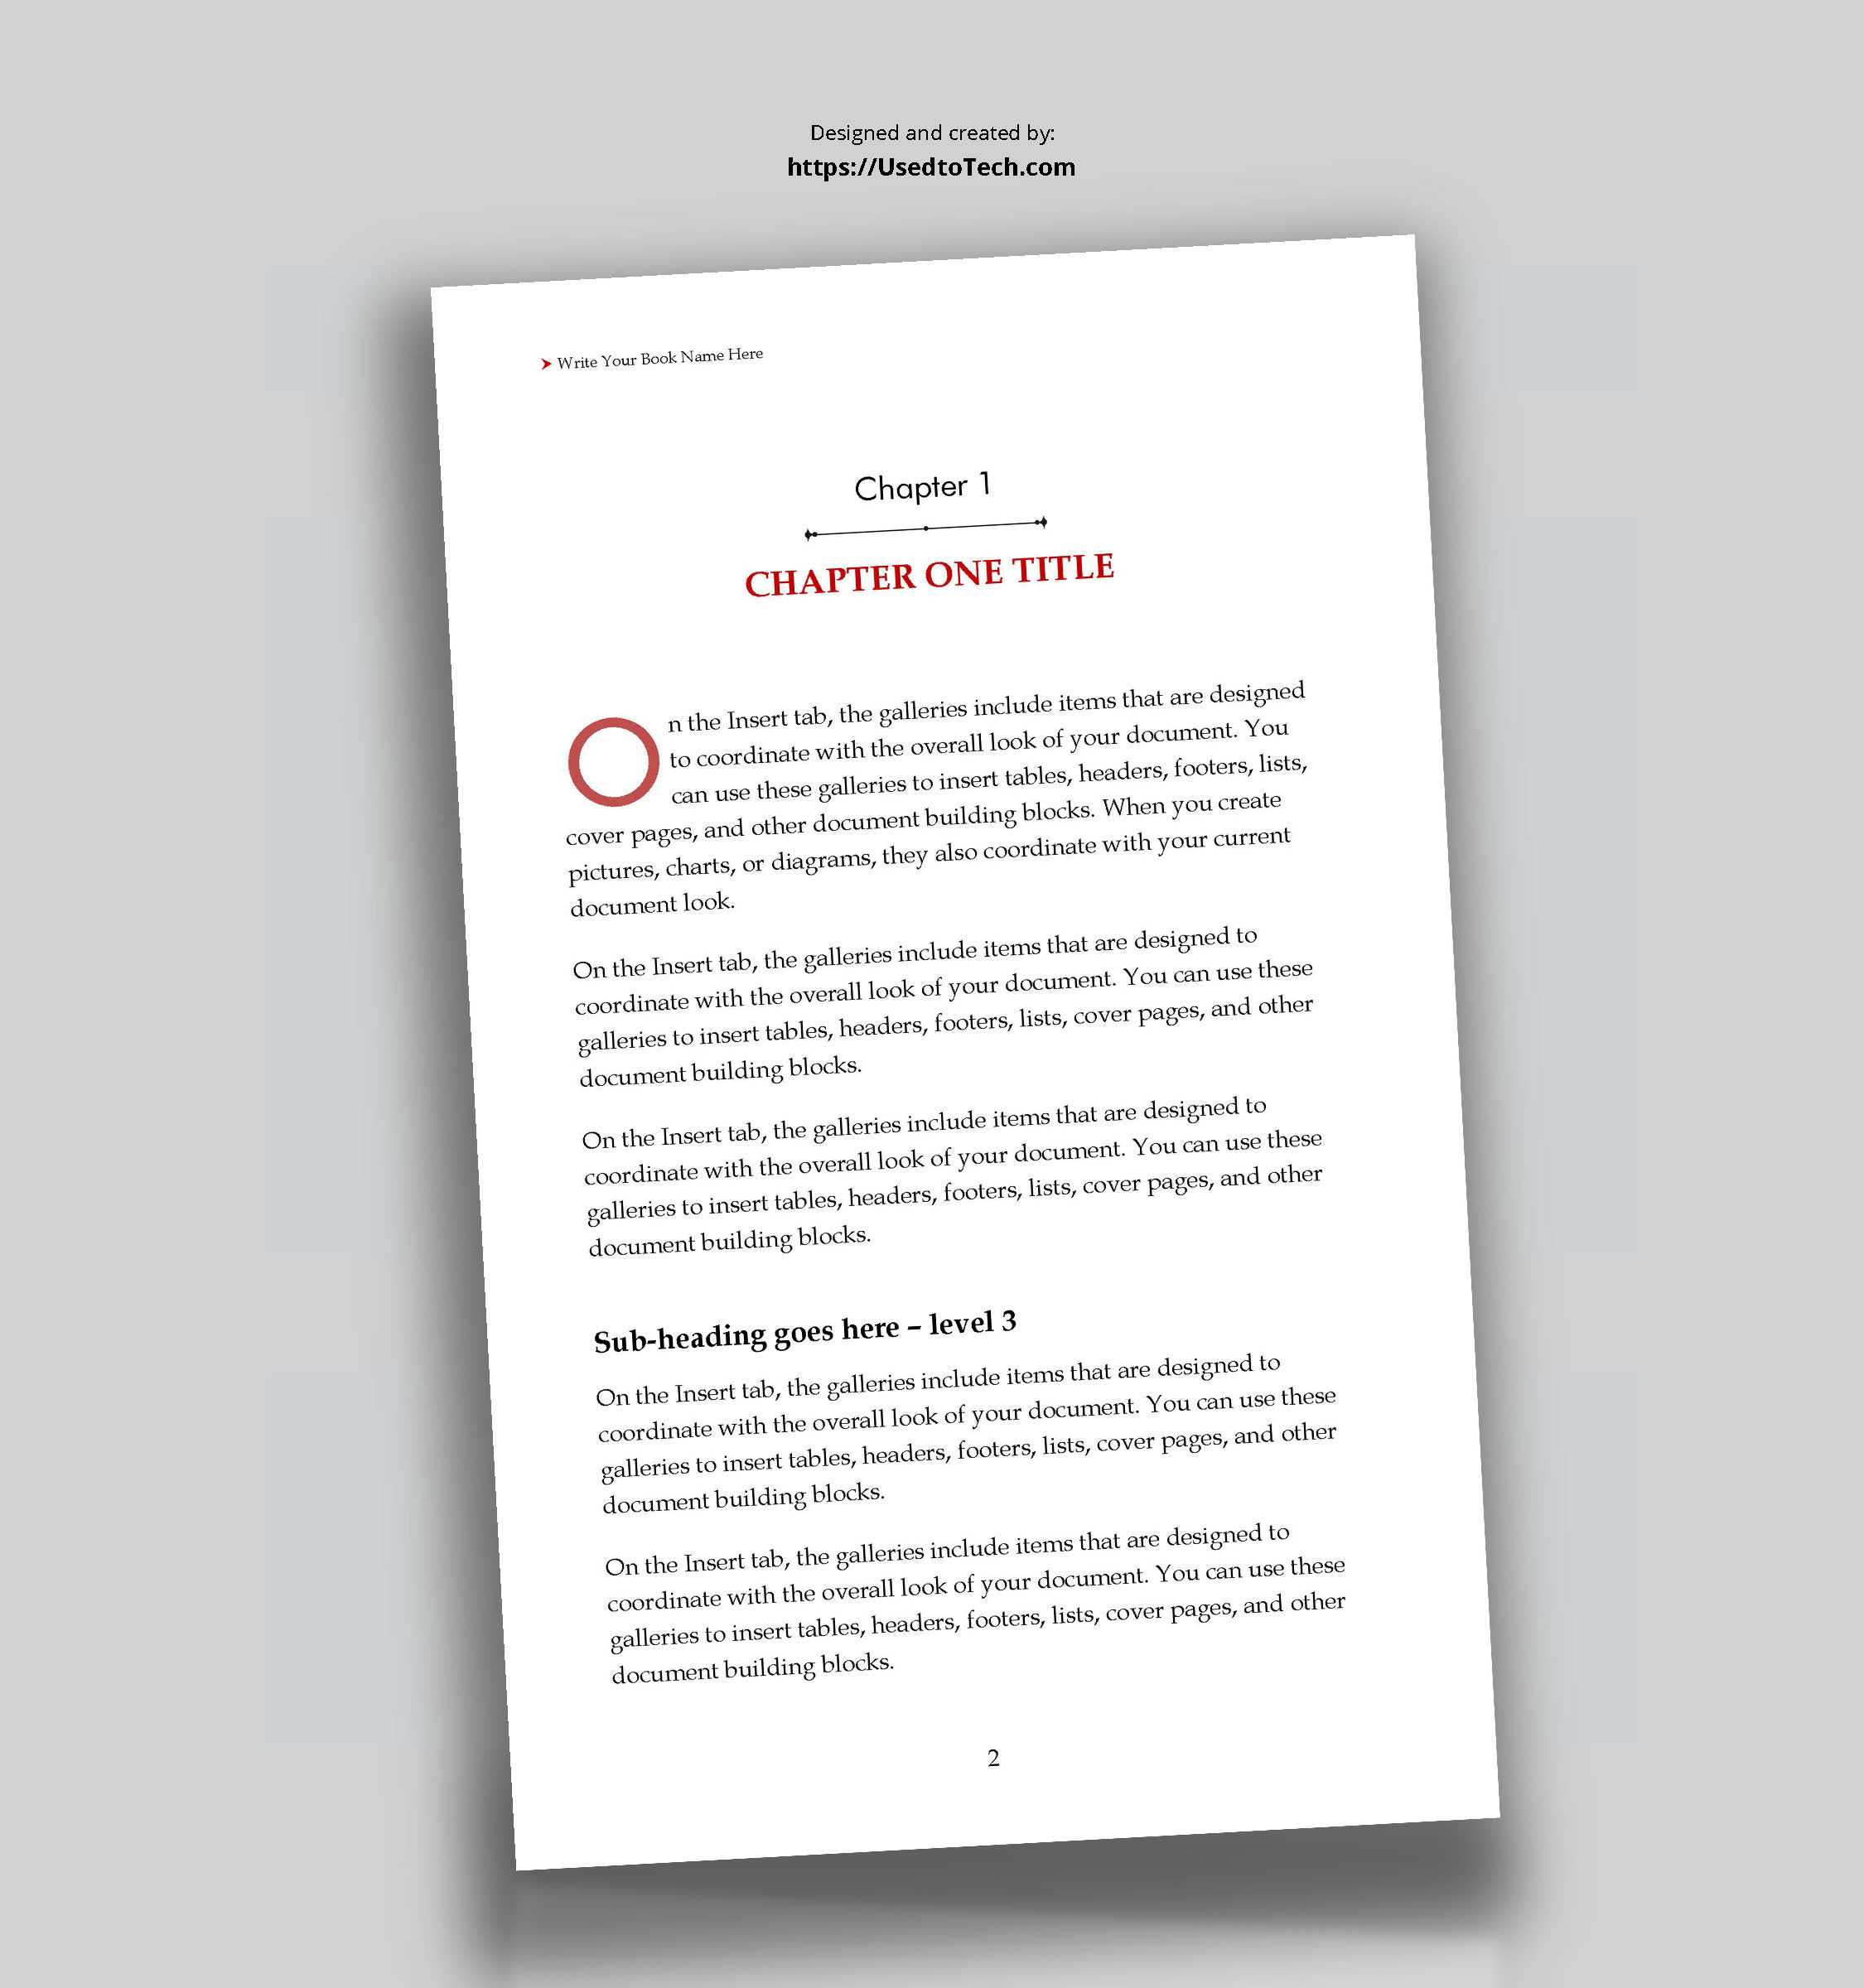 5 X 8 Editable Book Template In Word – Used To Tech With Regard To How To Create A Book Template In Word